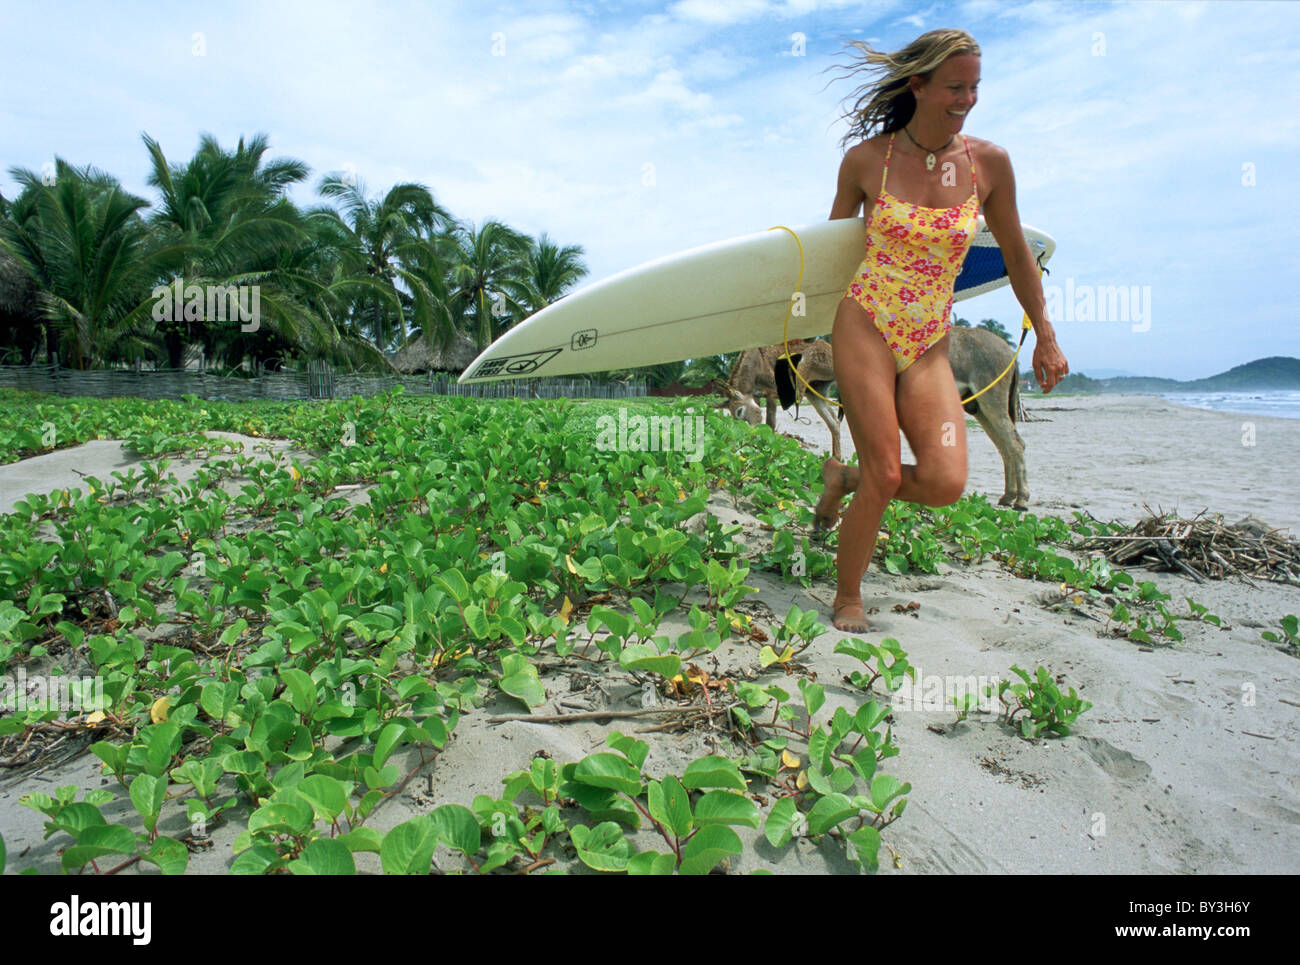 Female surfer running on beach with surfboard. Stock Photo